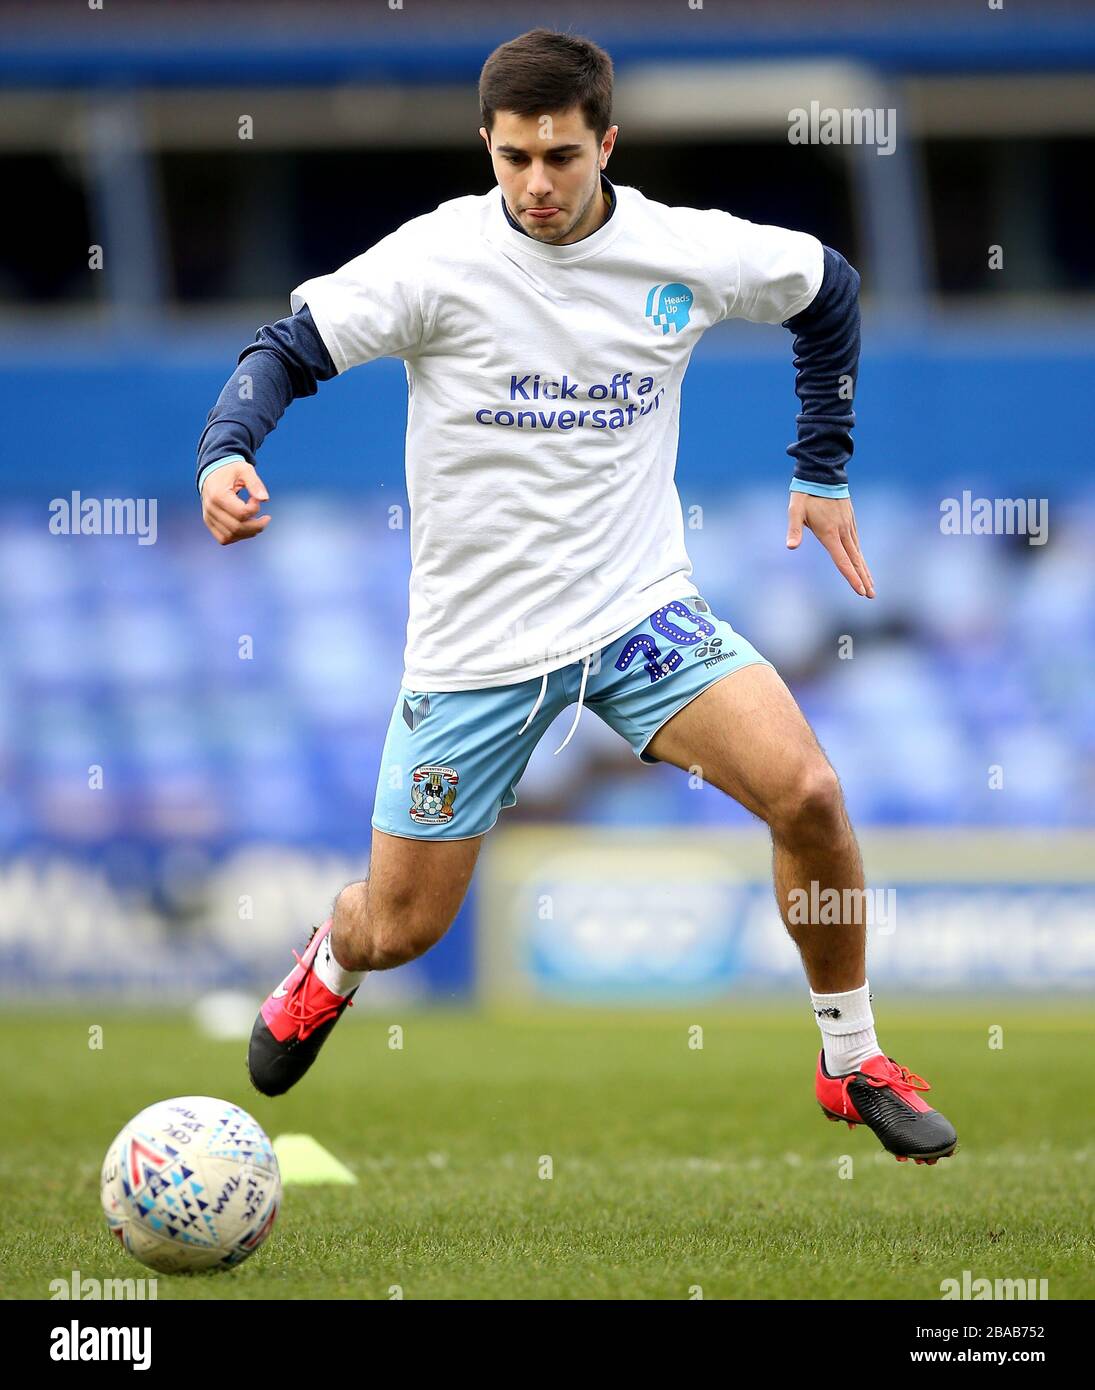 Coventry City's Liam Walsh wears a Heads Up t-shirt during the pre-match warm up prior to the beginning of the match Stock Photo